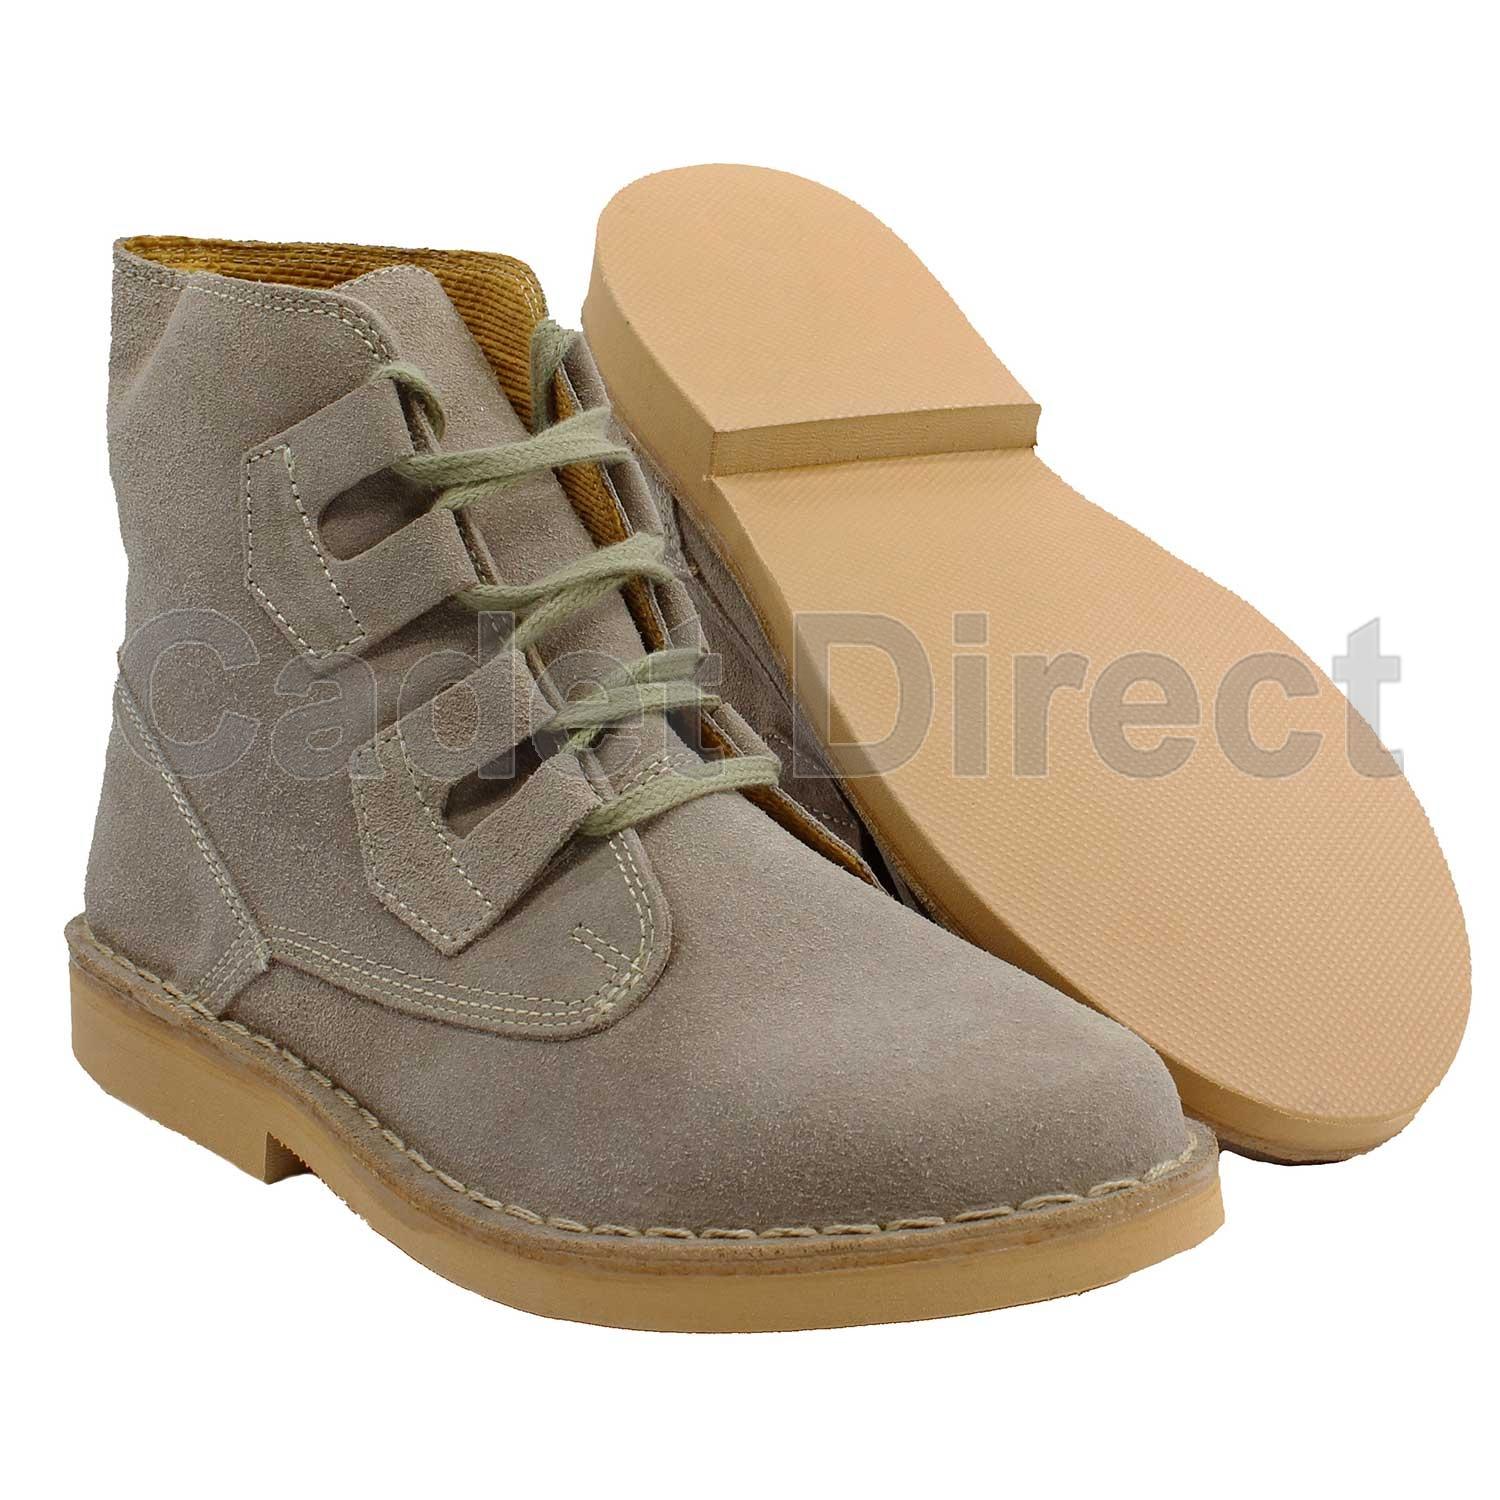 ghillie boots uk